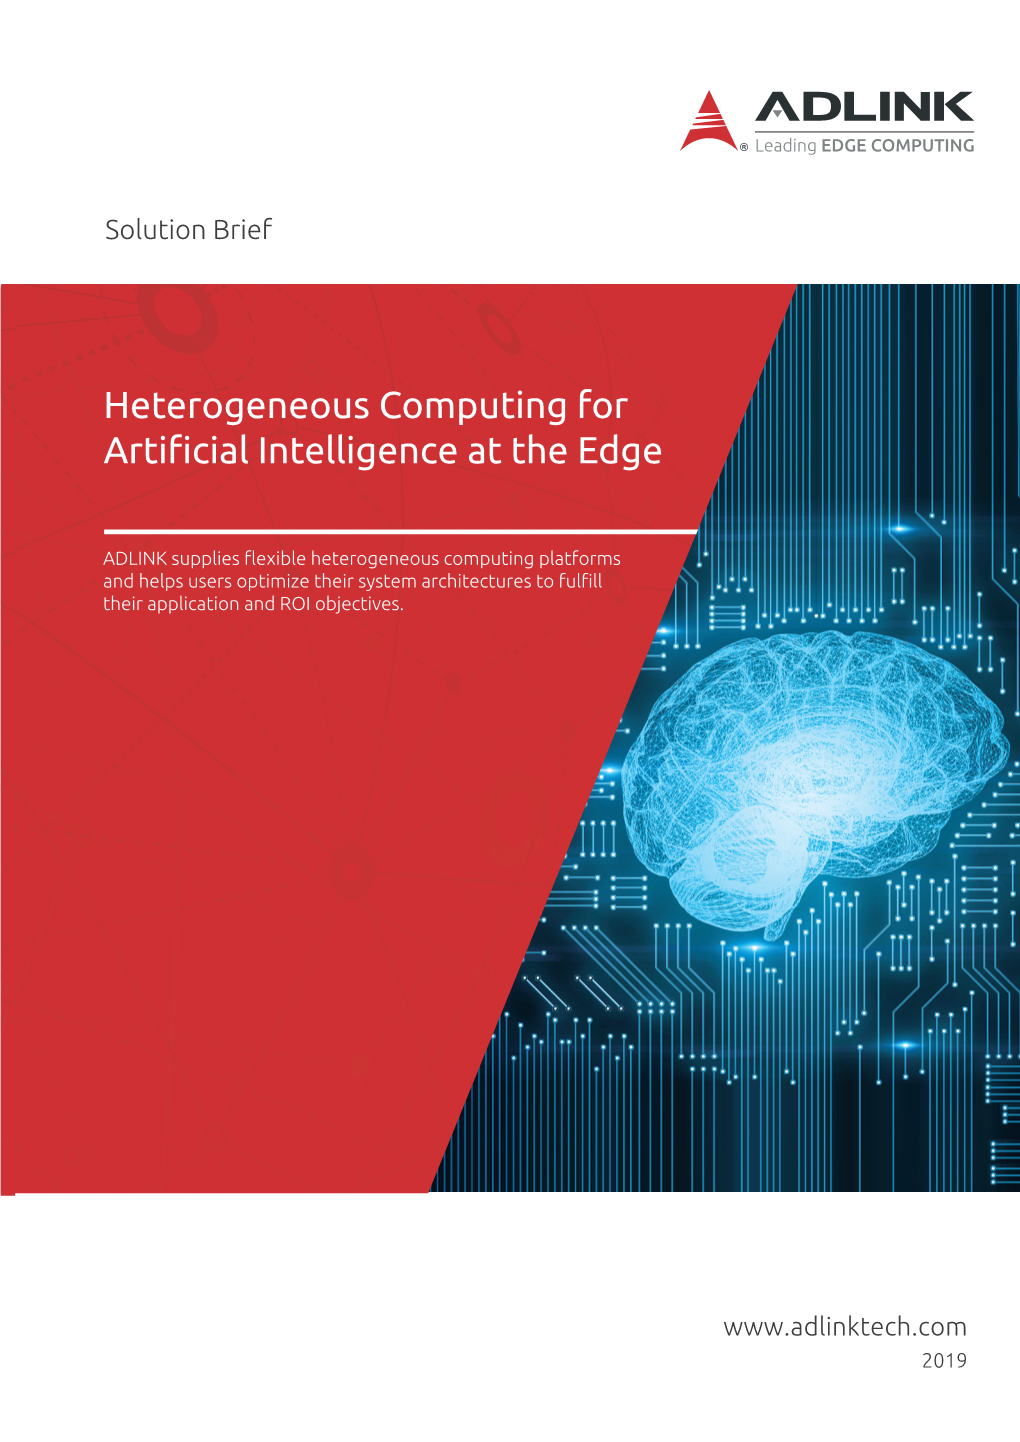 Heterogeneous Computing for Artificial Intelligence at the Edge